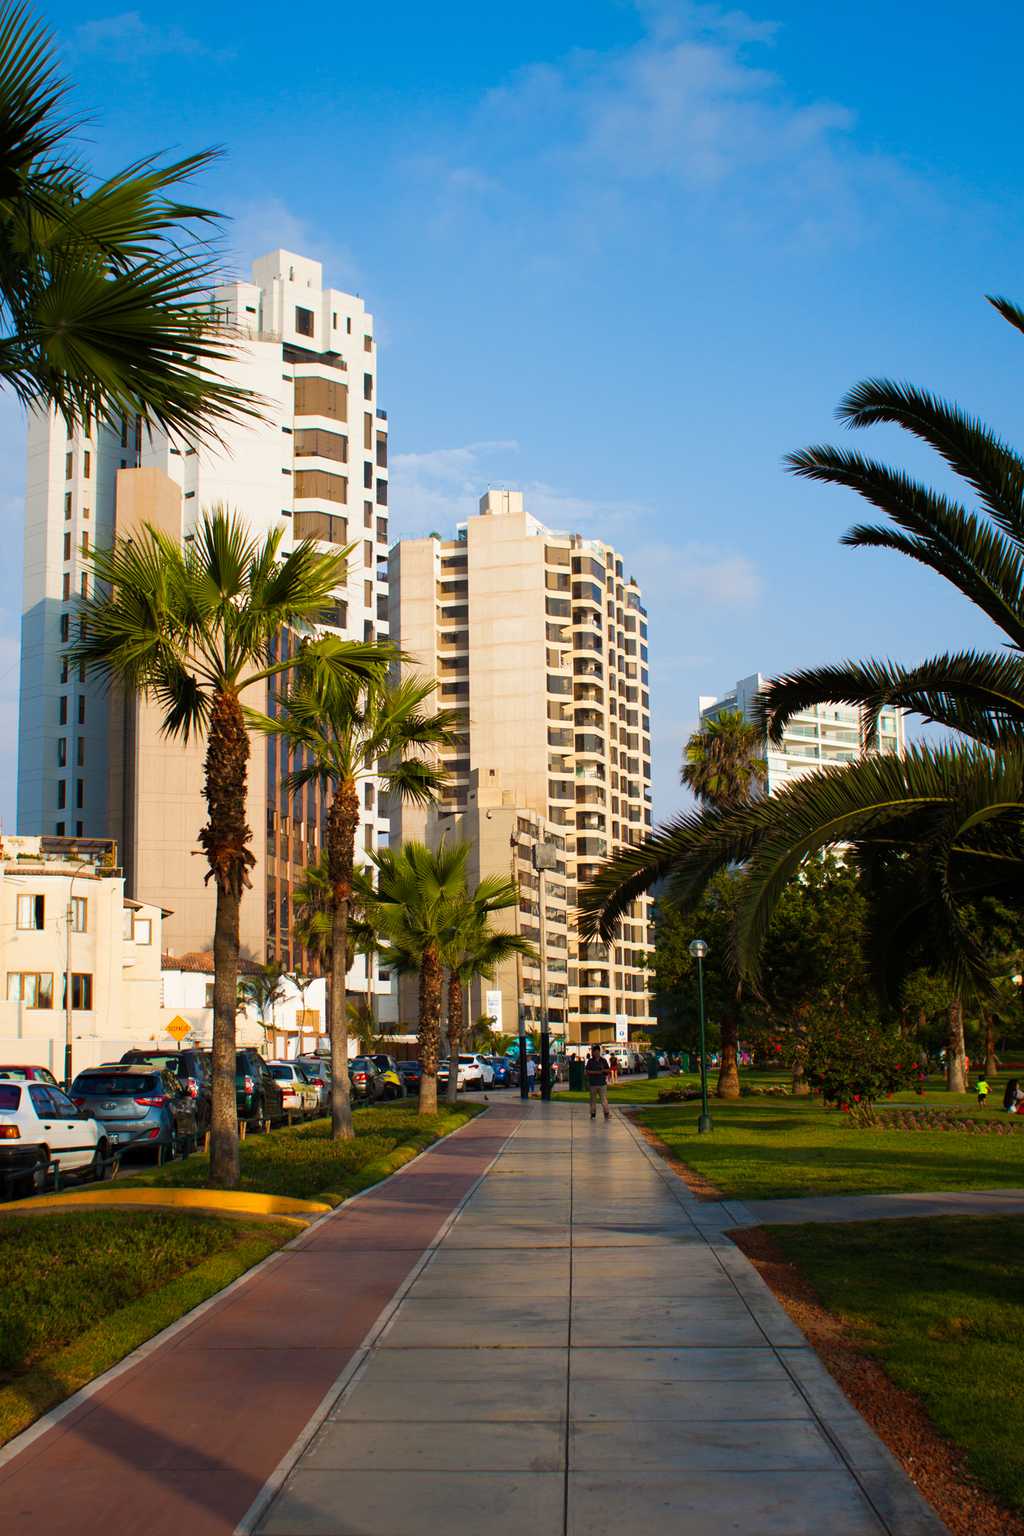 Highrise apartments and hotels, bars, and an almost calm atmosphere separates MiraFlores from the rest of Lima